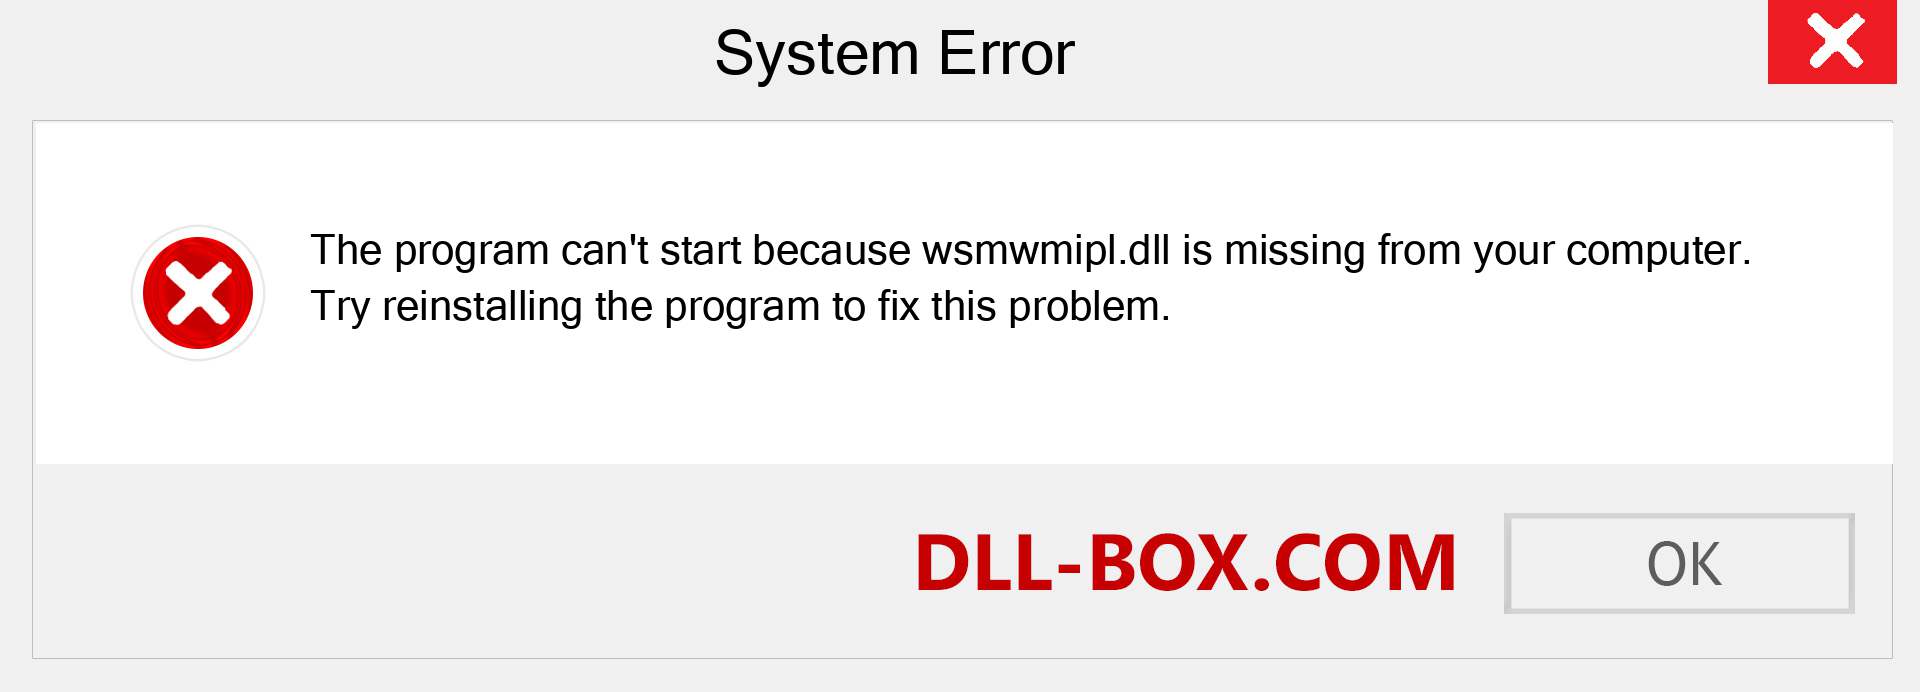  wsmwmipl.dll file is missing?. Download for Windows 7, 8, 10 - Fix  wsmwmipl dll Missing Error on Windows, photos, images